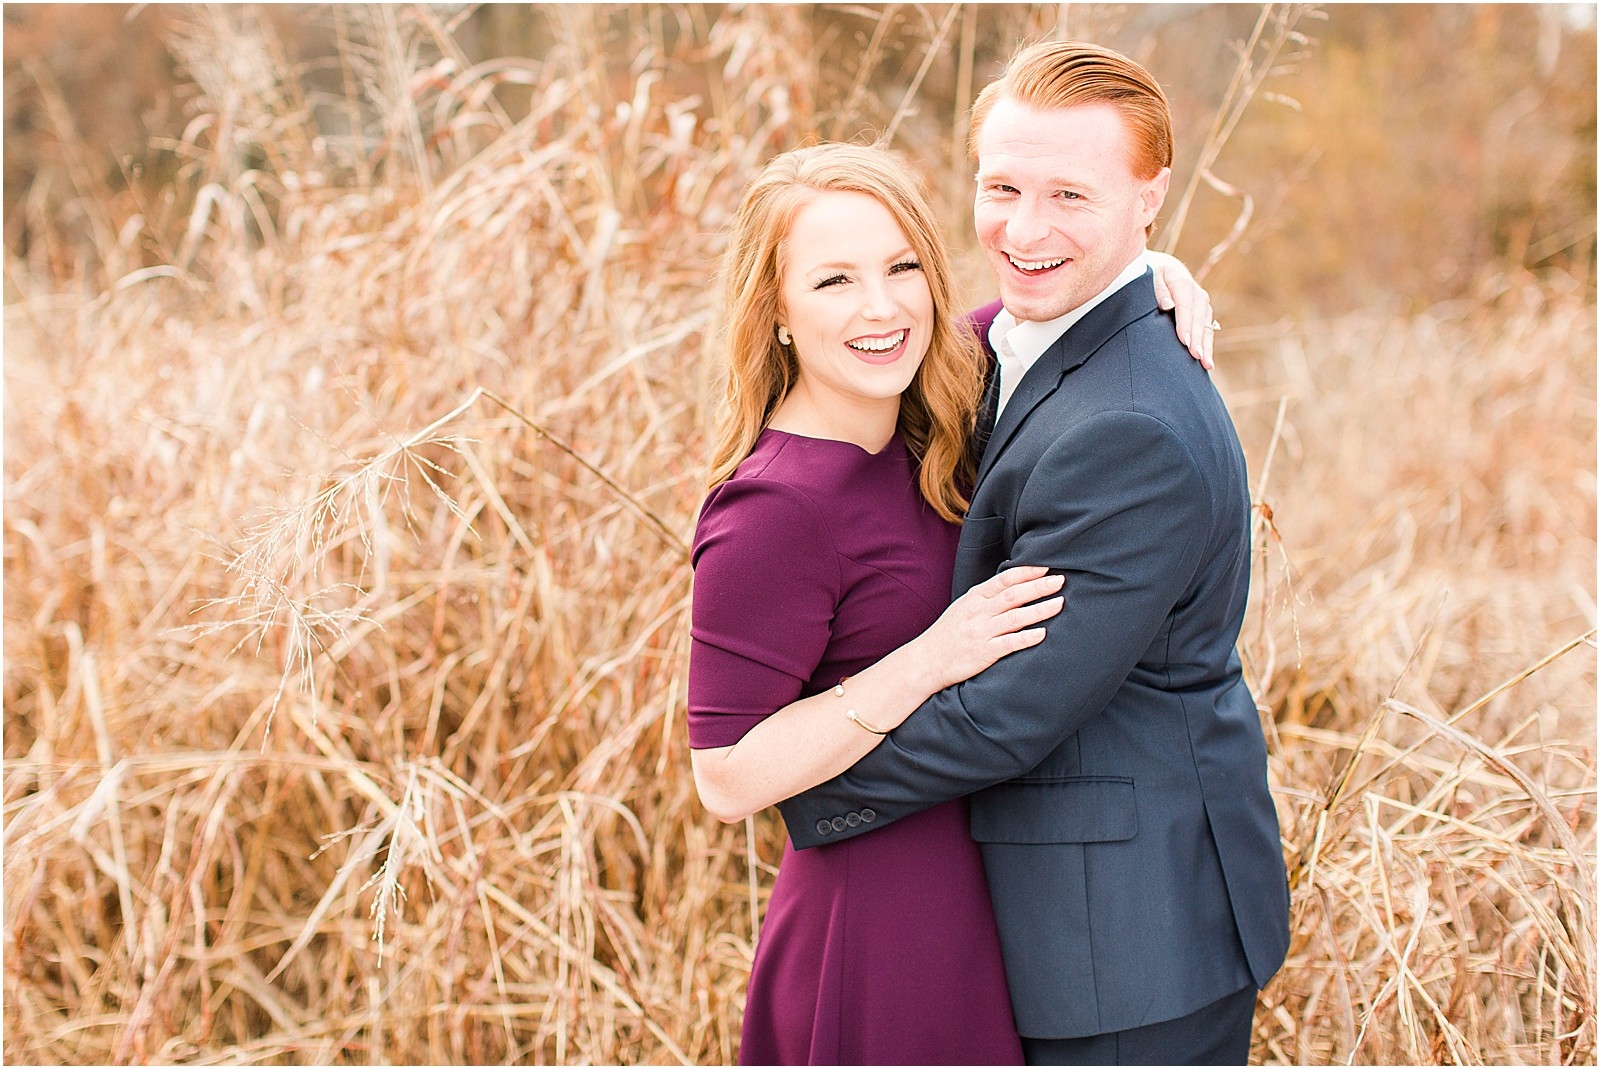 A Mesker Park Zoo Engagement Session | Jennah and Steve | Bret and Brandie Photography008.jpg